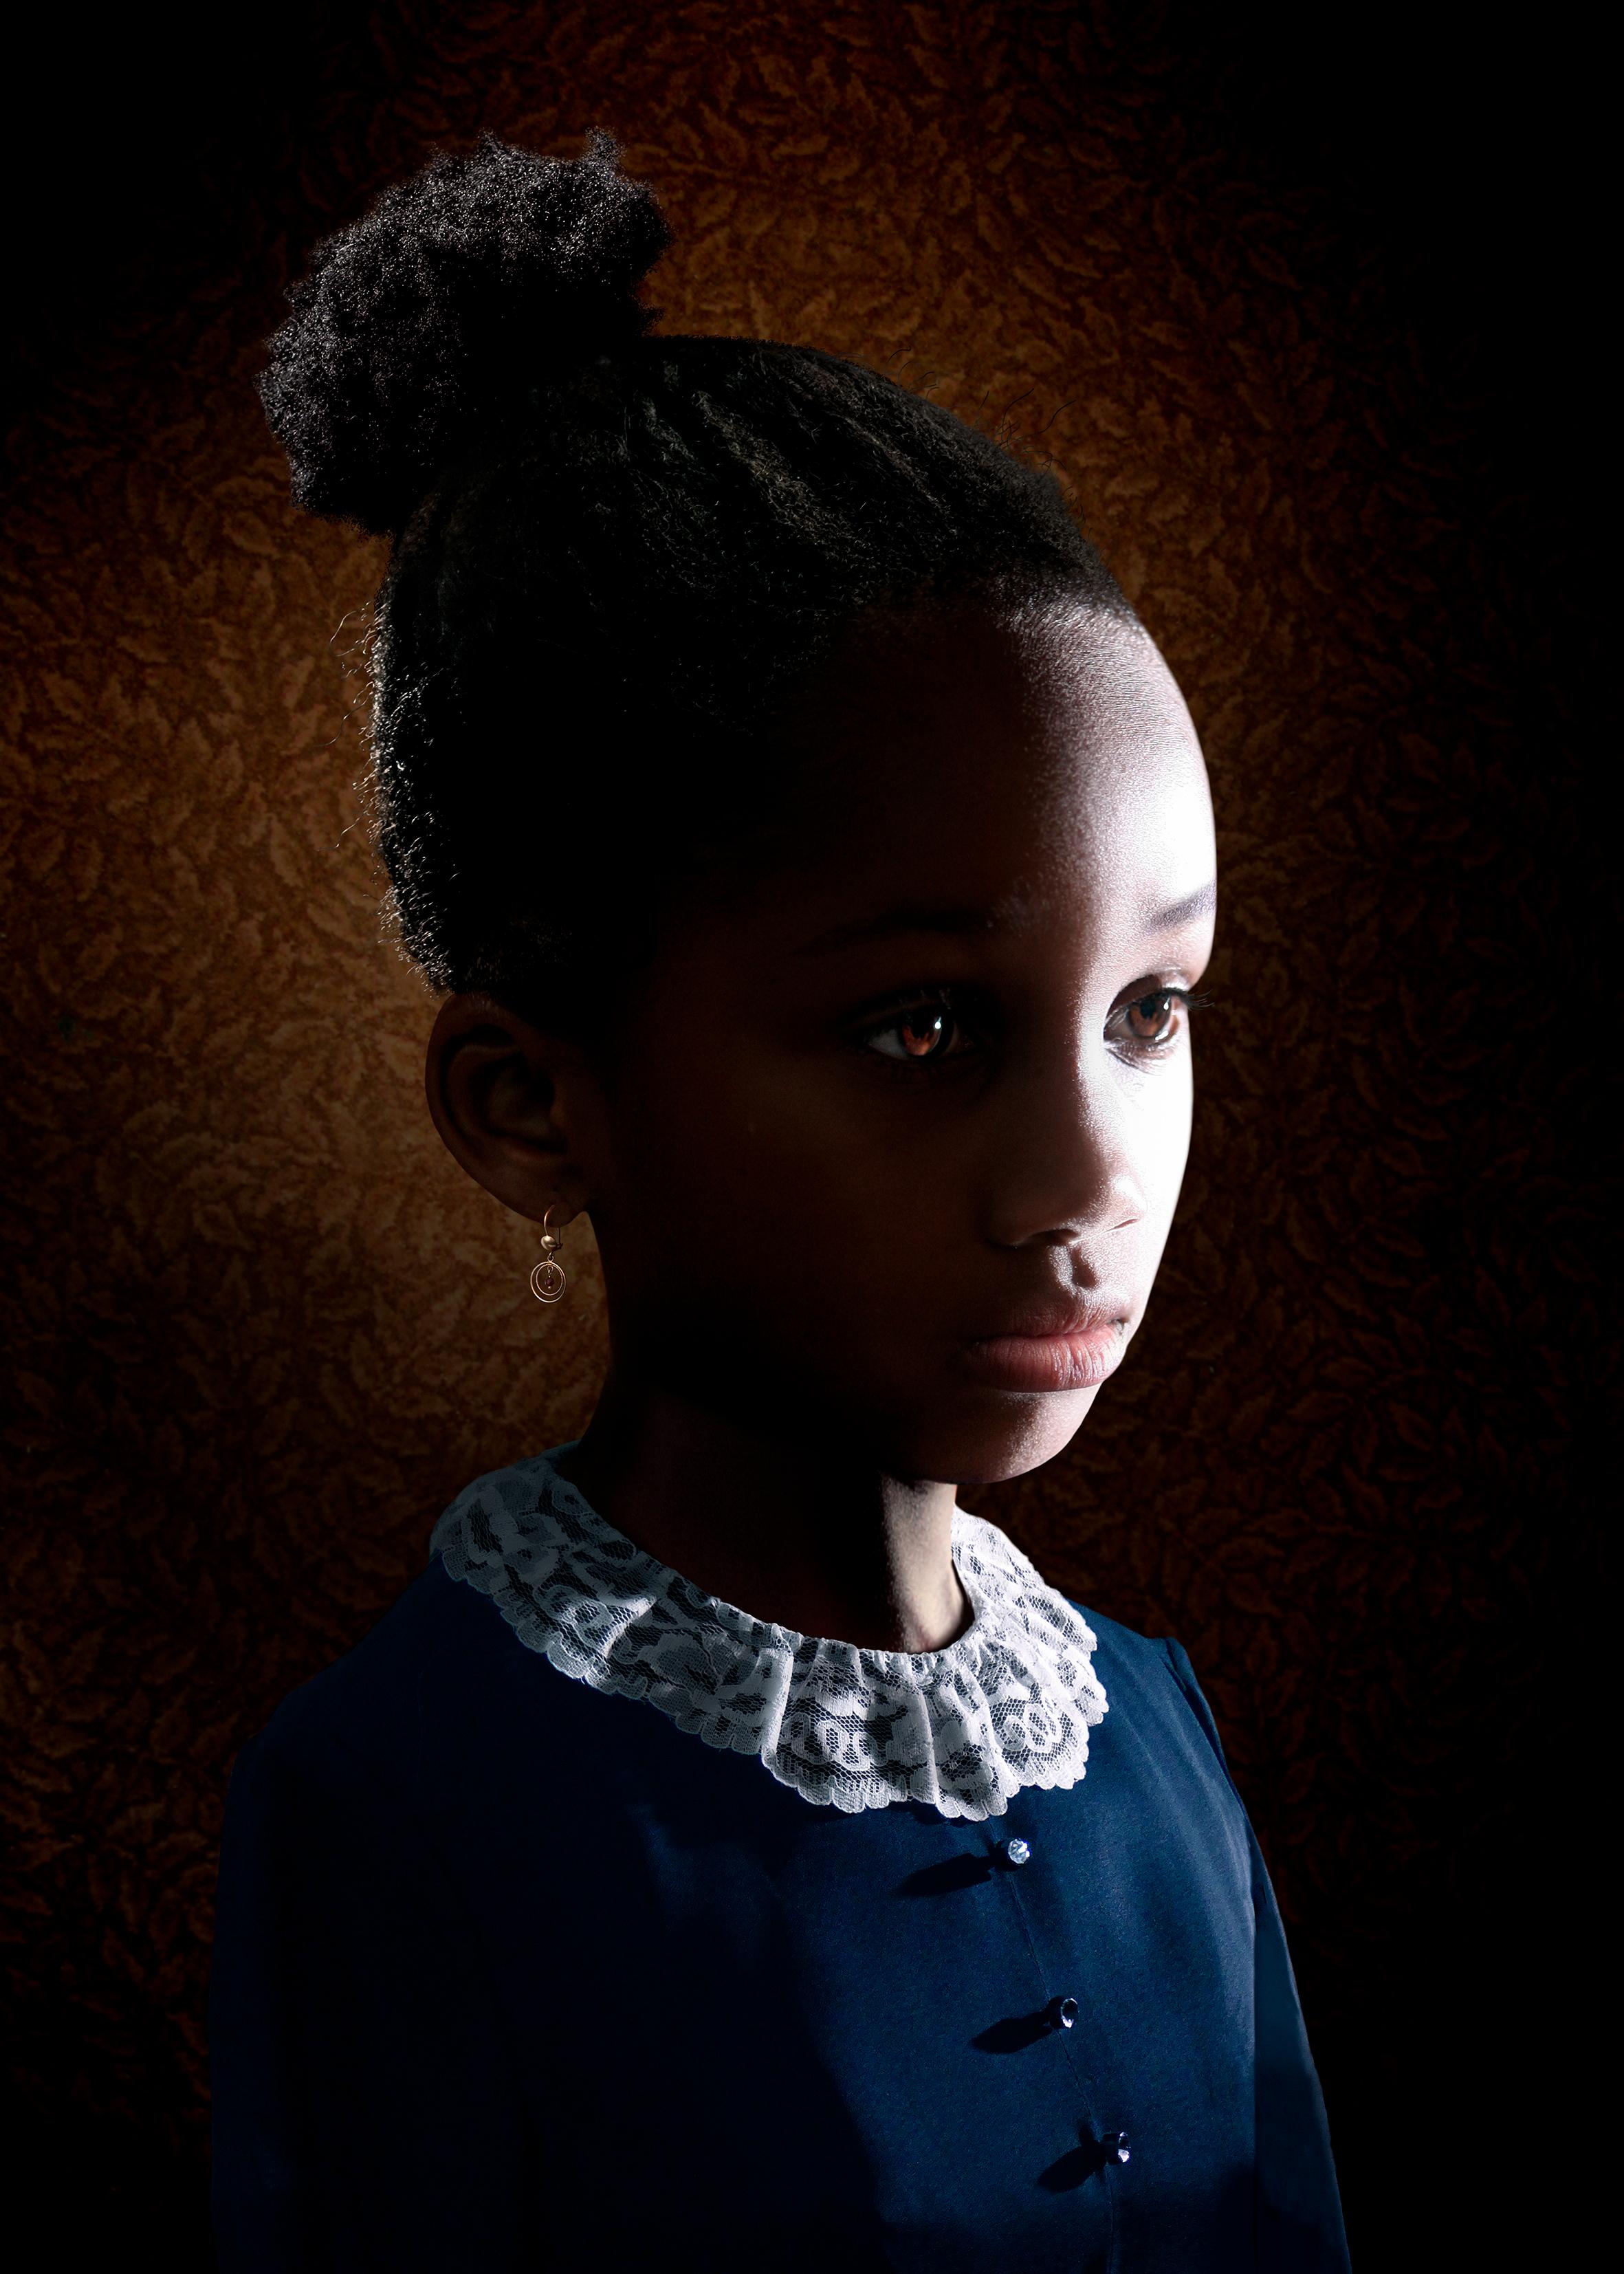 Signed, dated inscribed with title and numbered on label on reverse
Archival pigment print
33 x 23 1/2 inches
From an edition of 10 + 2 APs

Ruud van Empel (b. 1958) is one of the most innovative contemporary photographers working today. Van Empel’s